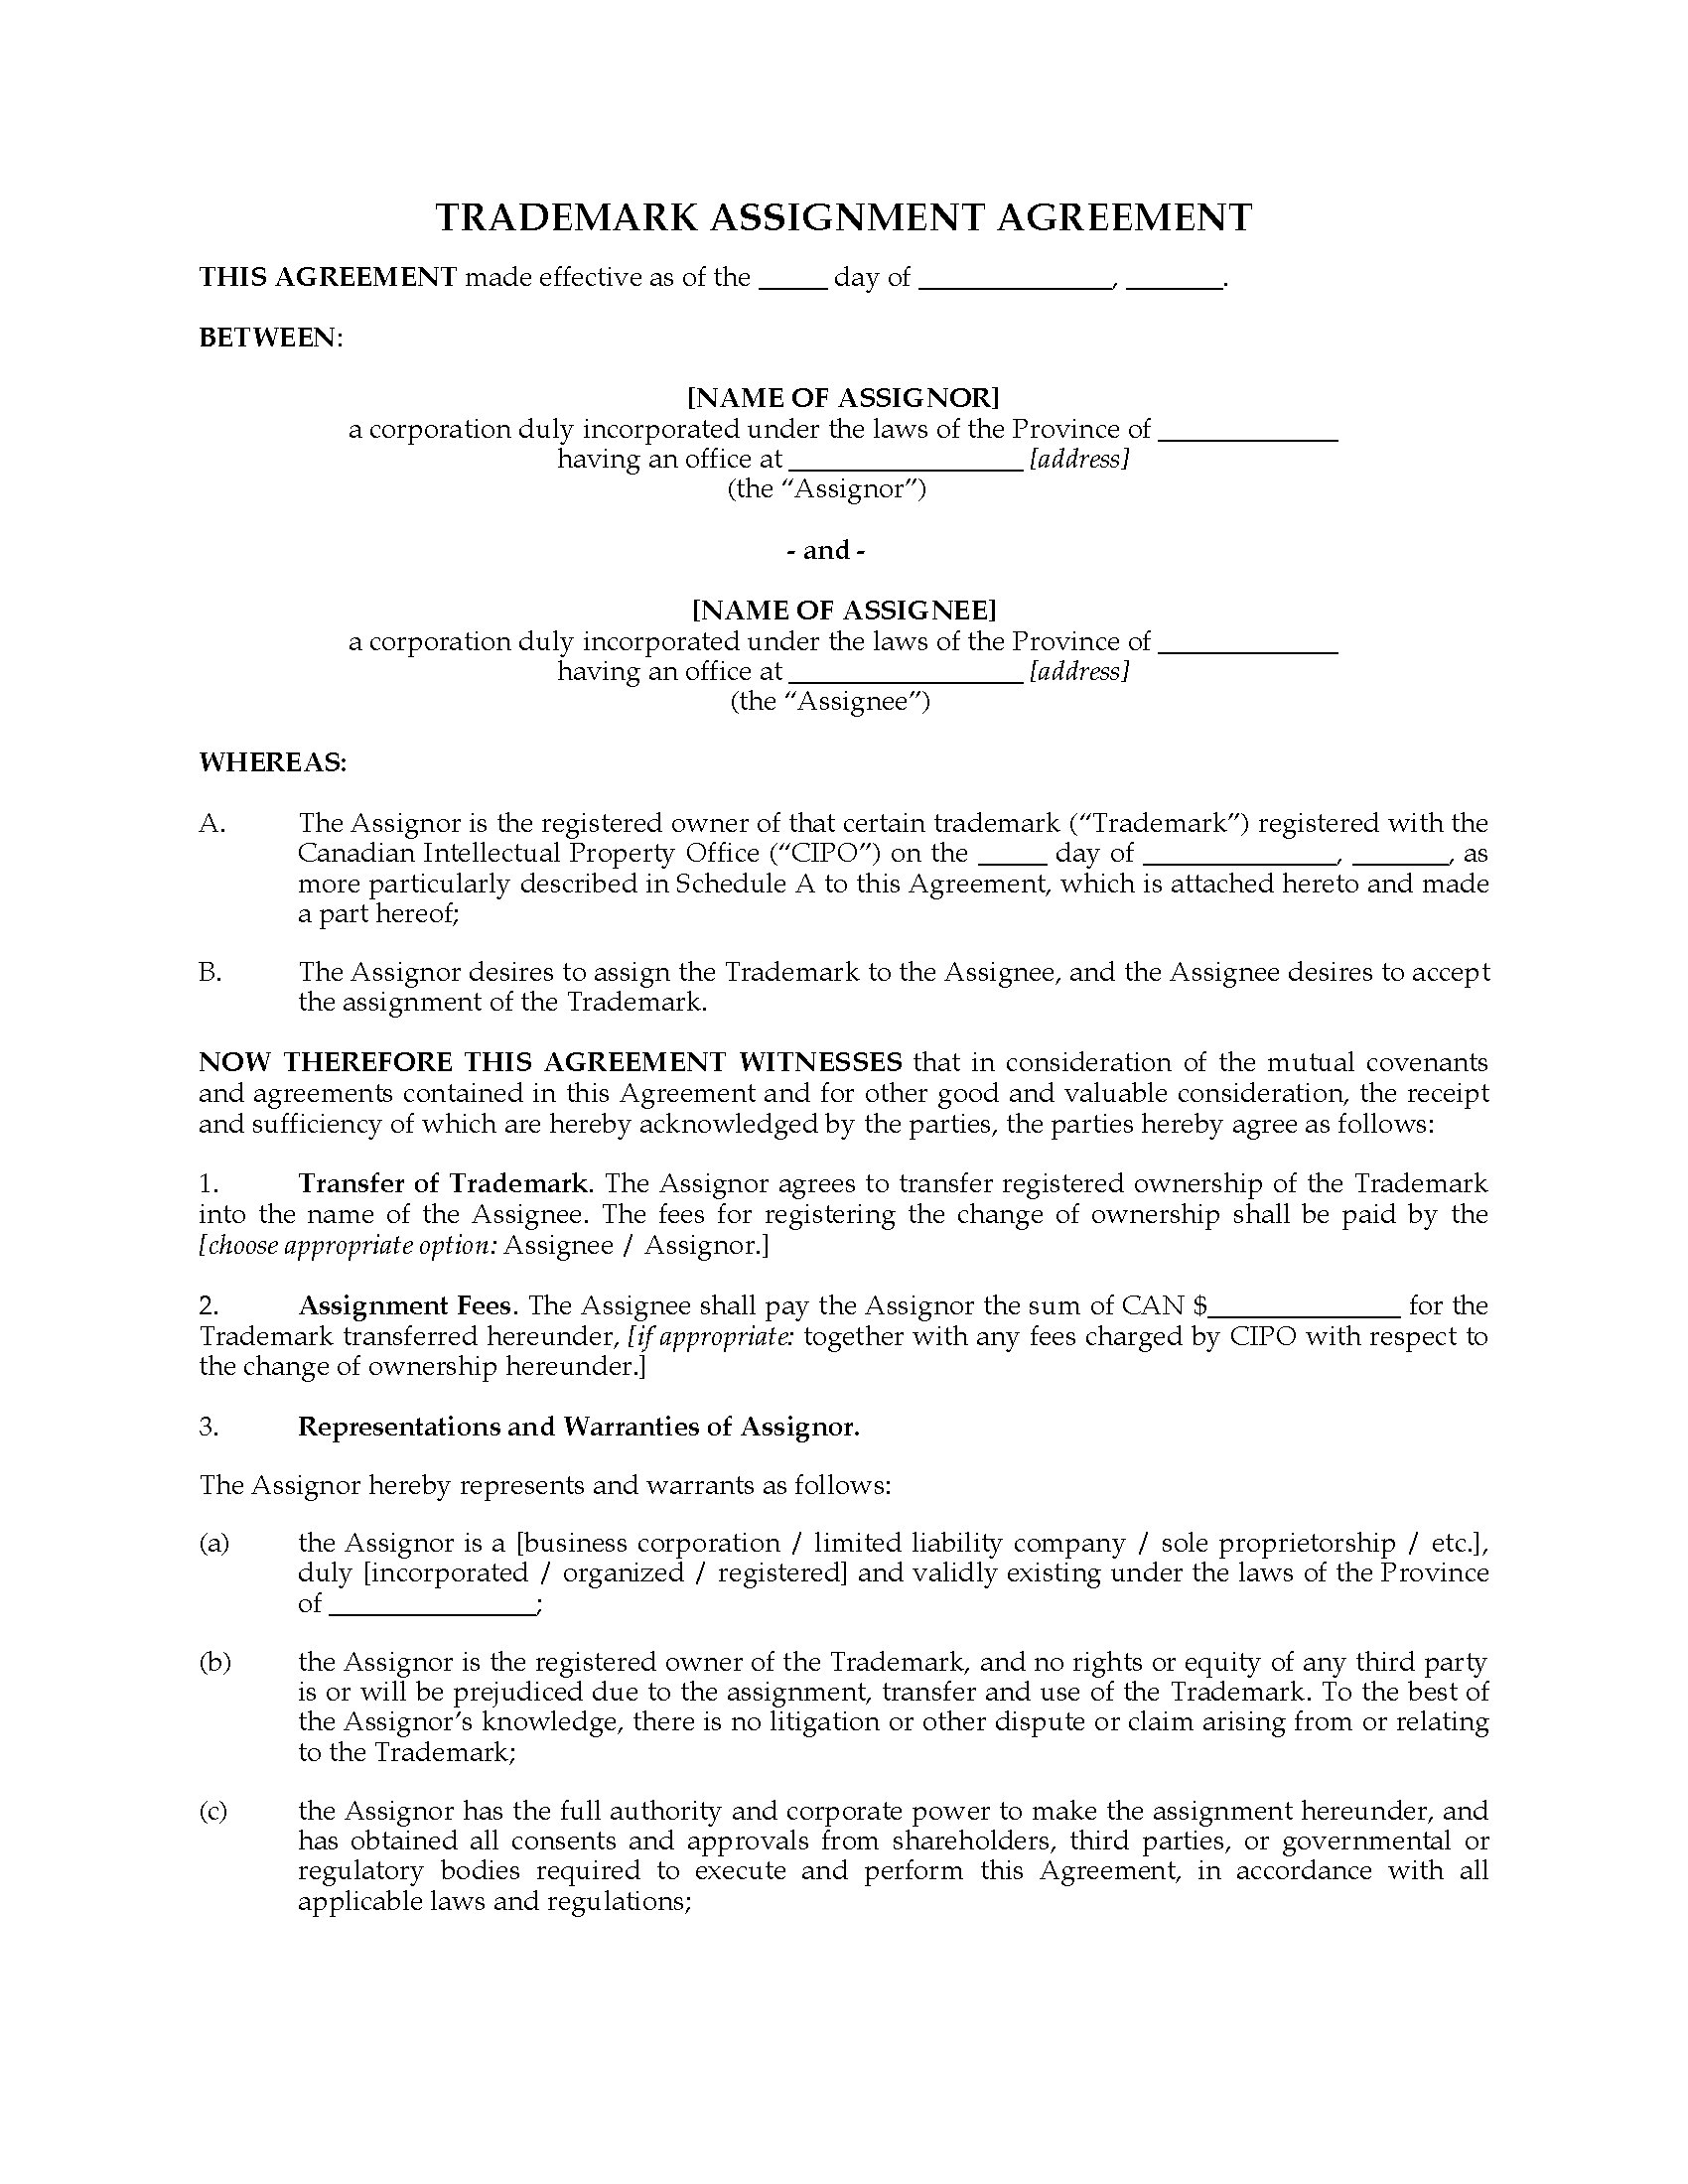 assignment agreement canada